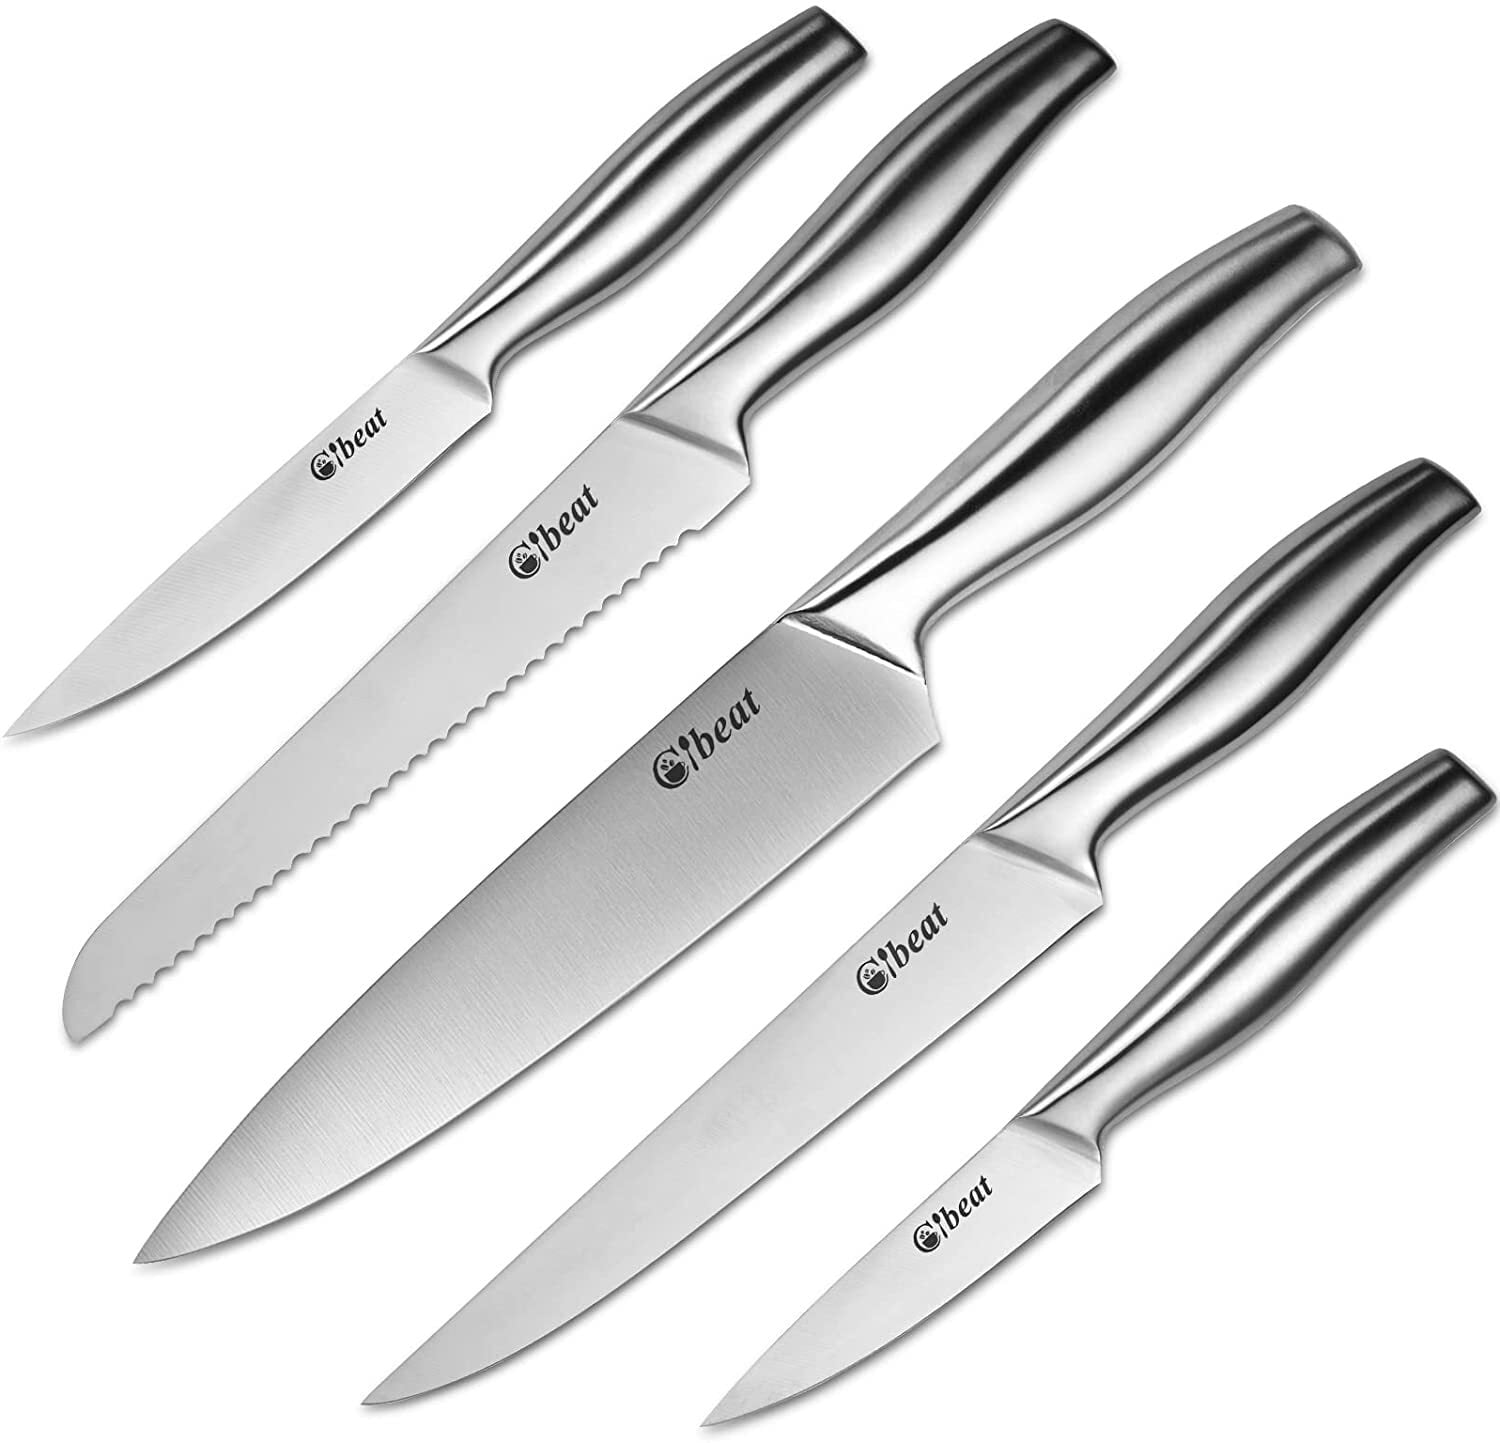 Kitchen Knife Set, 5 Pcs Green Professional Chef Knife Set with Block,  Super Sharp Stainless Steel Cooking Knife Set Contains Round Stand, Knives